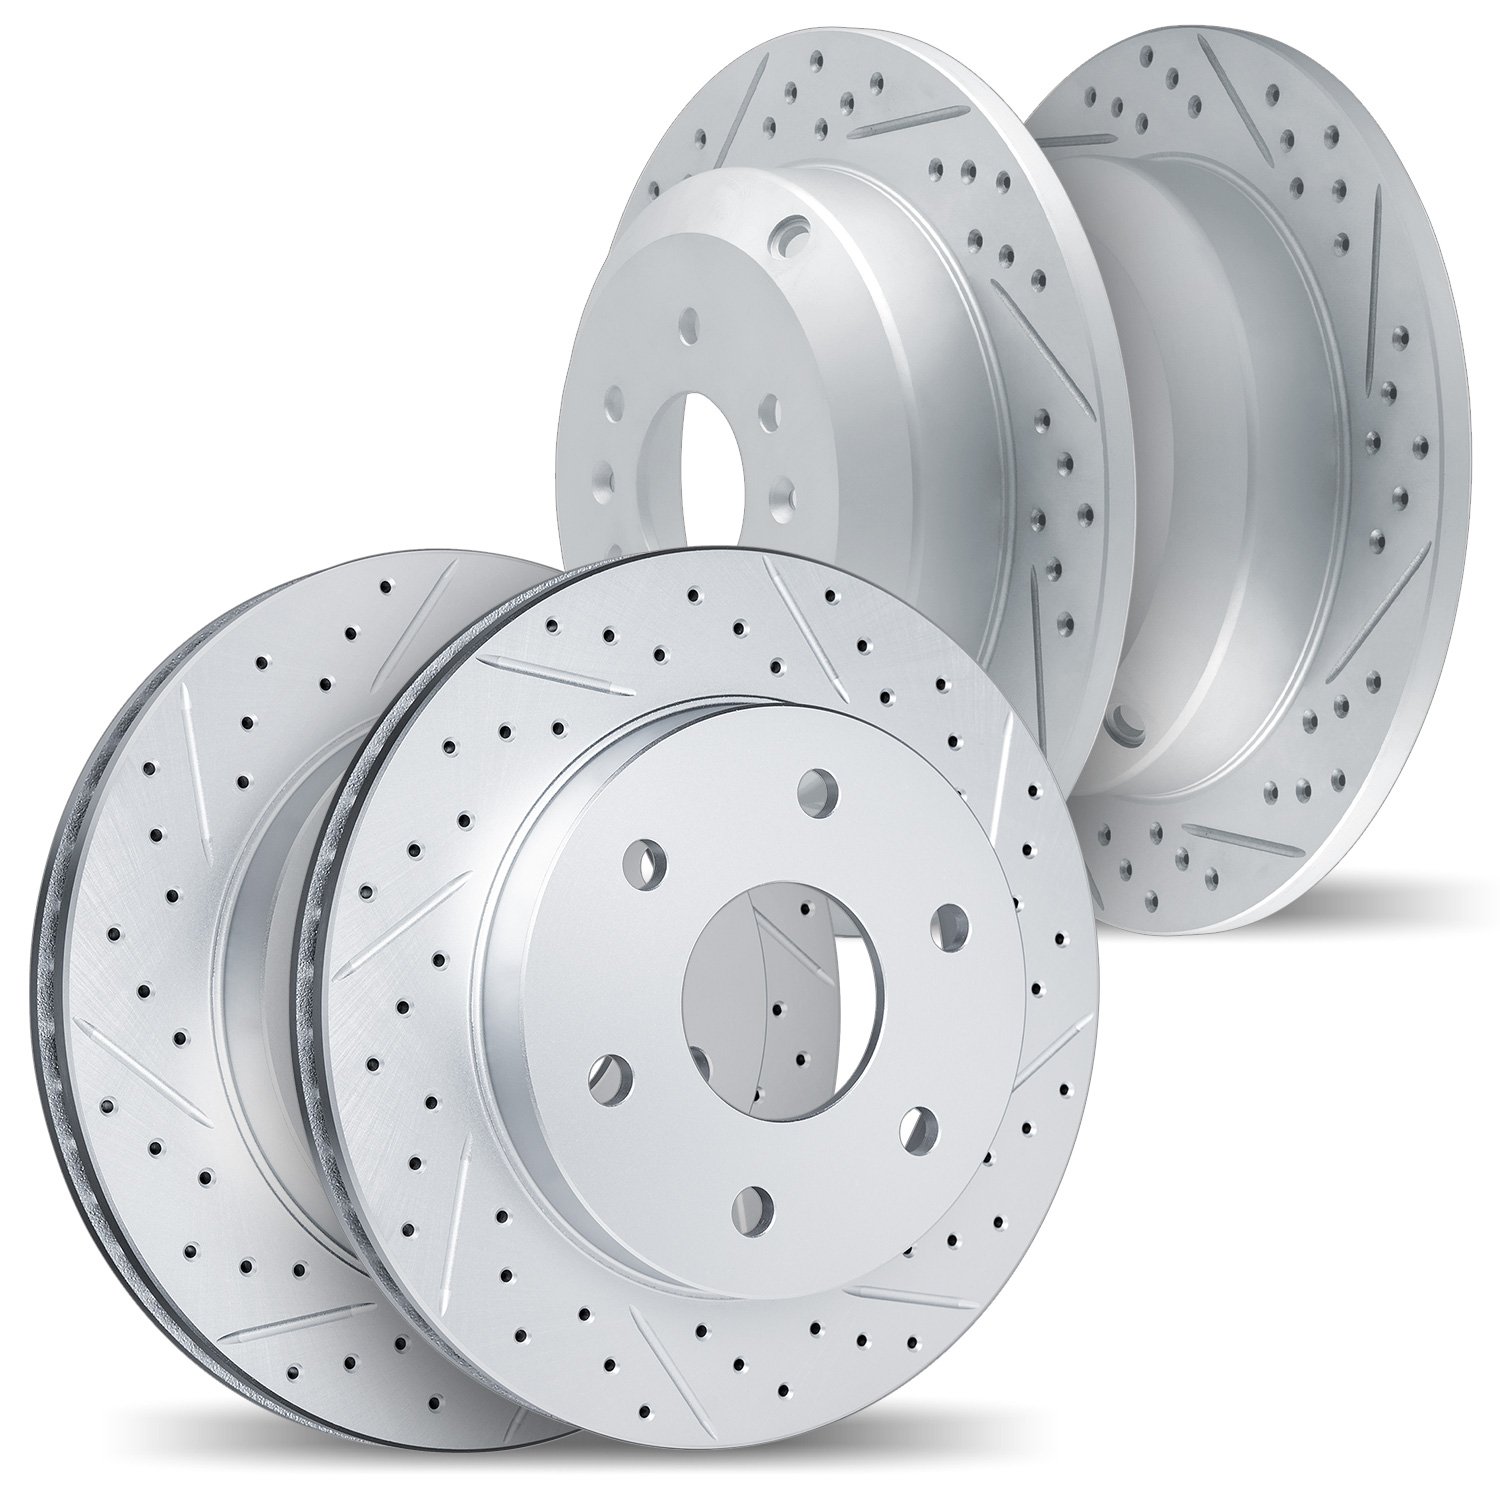 2004-67015 Geoperformance Drilled/Slotted Brake Rotors, 2004-2005 Infiniti/Nissan, Position: Front and Rear